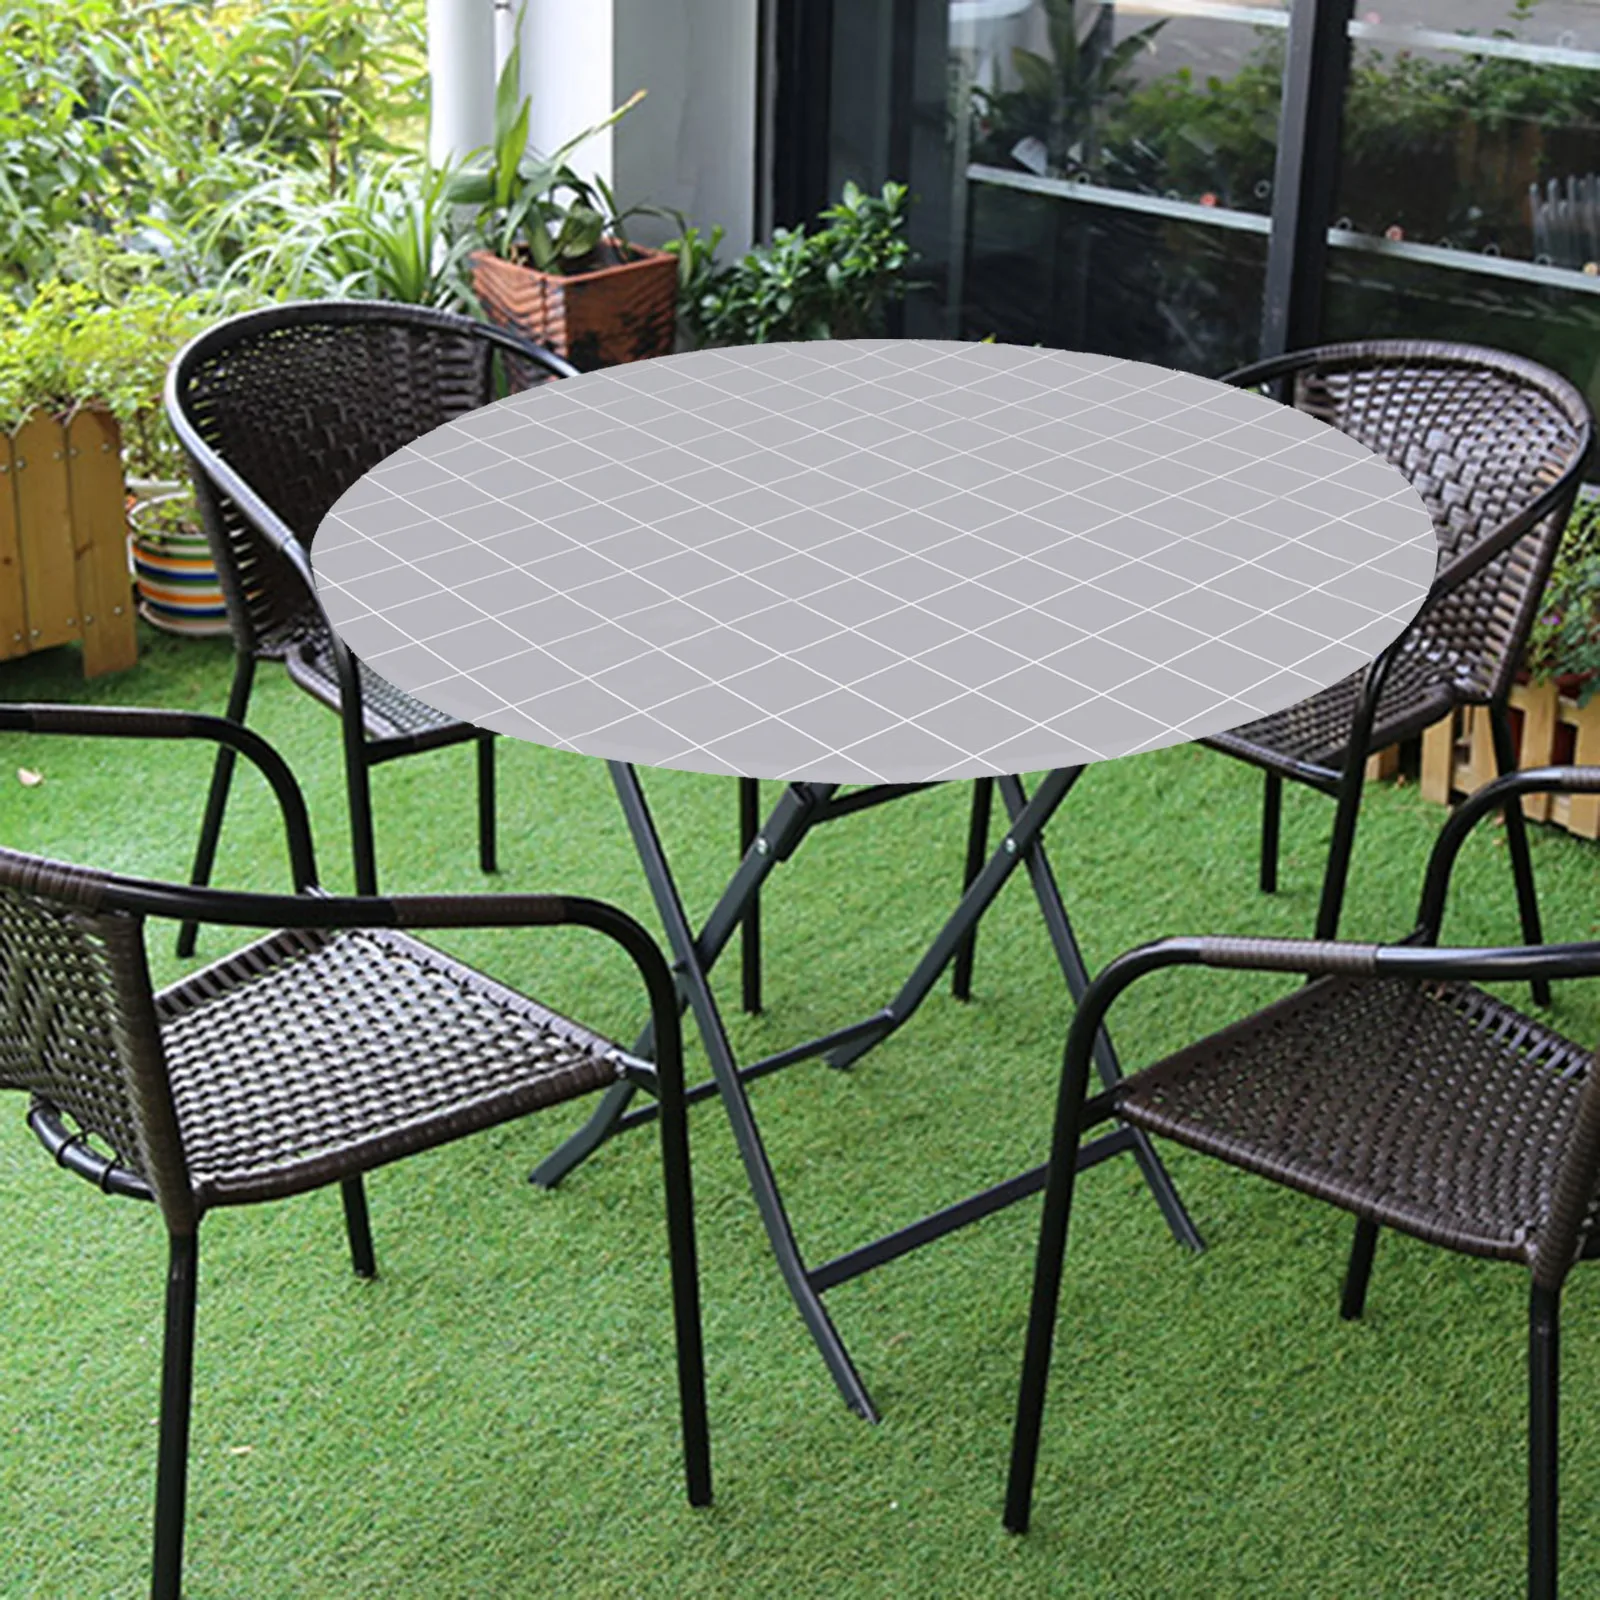 Fitted Table Cloth Water Resistance Dinner Table Cover Dust Proof Wipe Clean Plaid Table Cover Elastic Edged Large Round Table